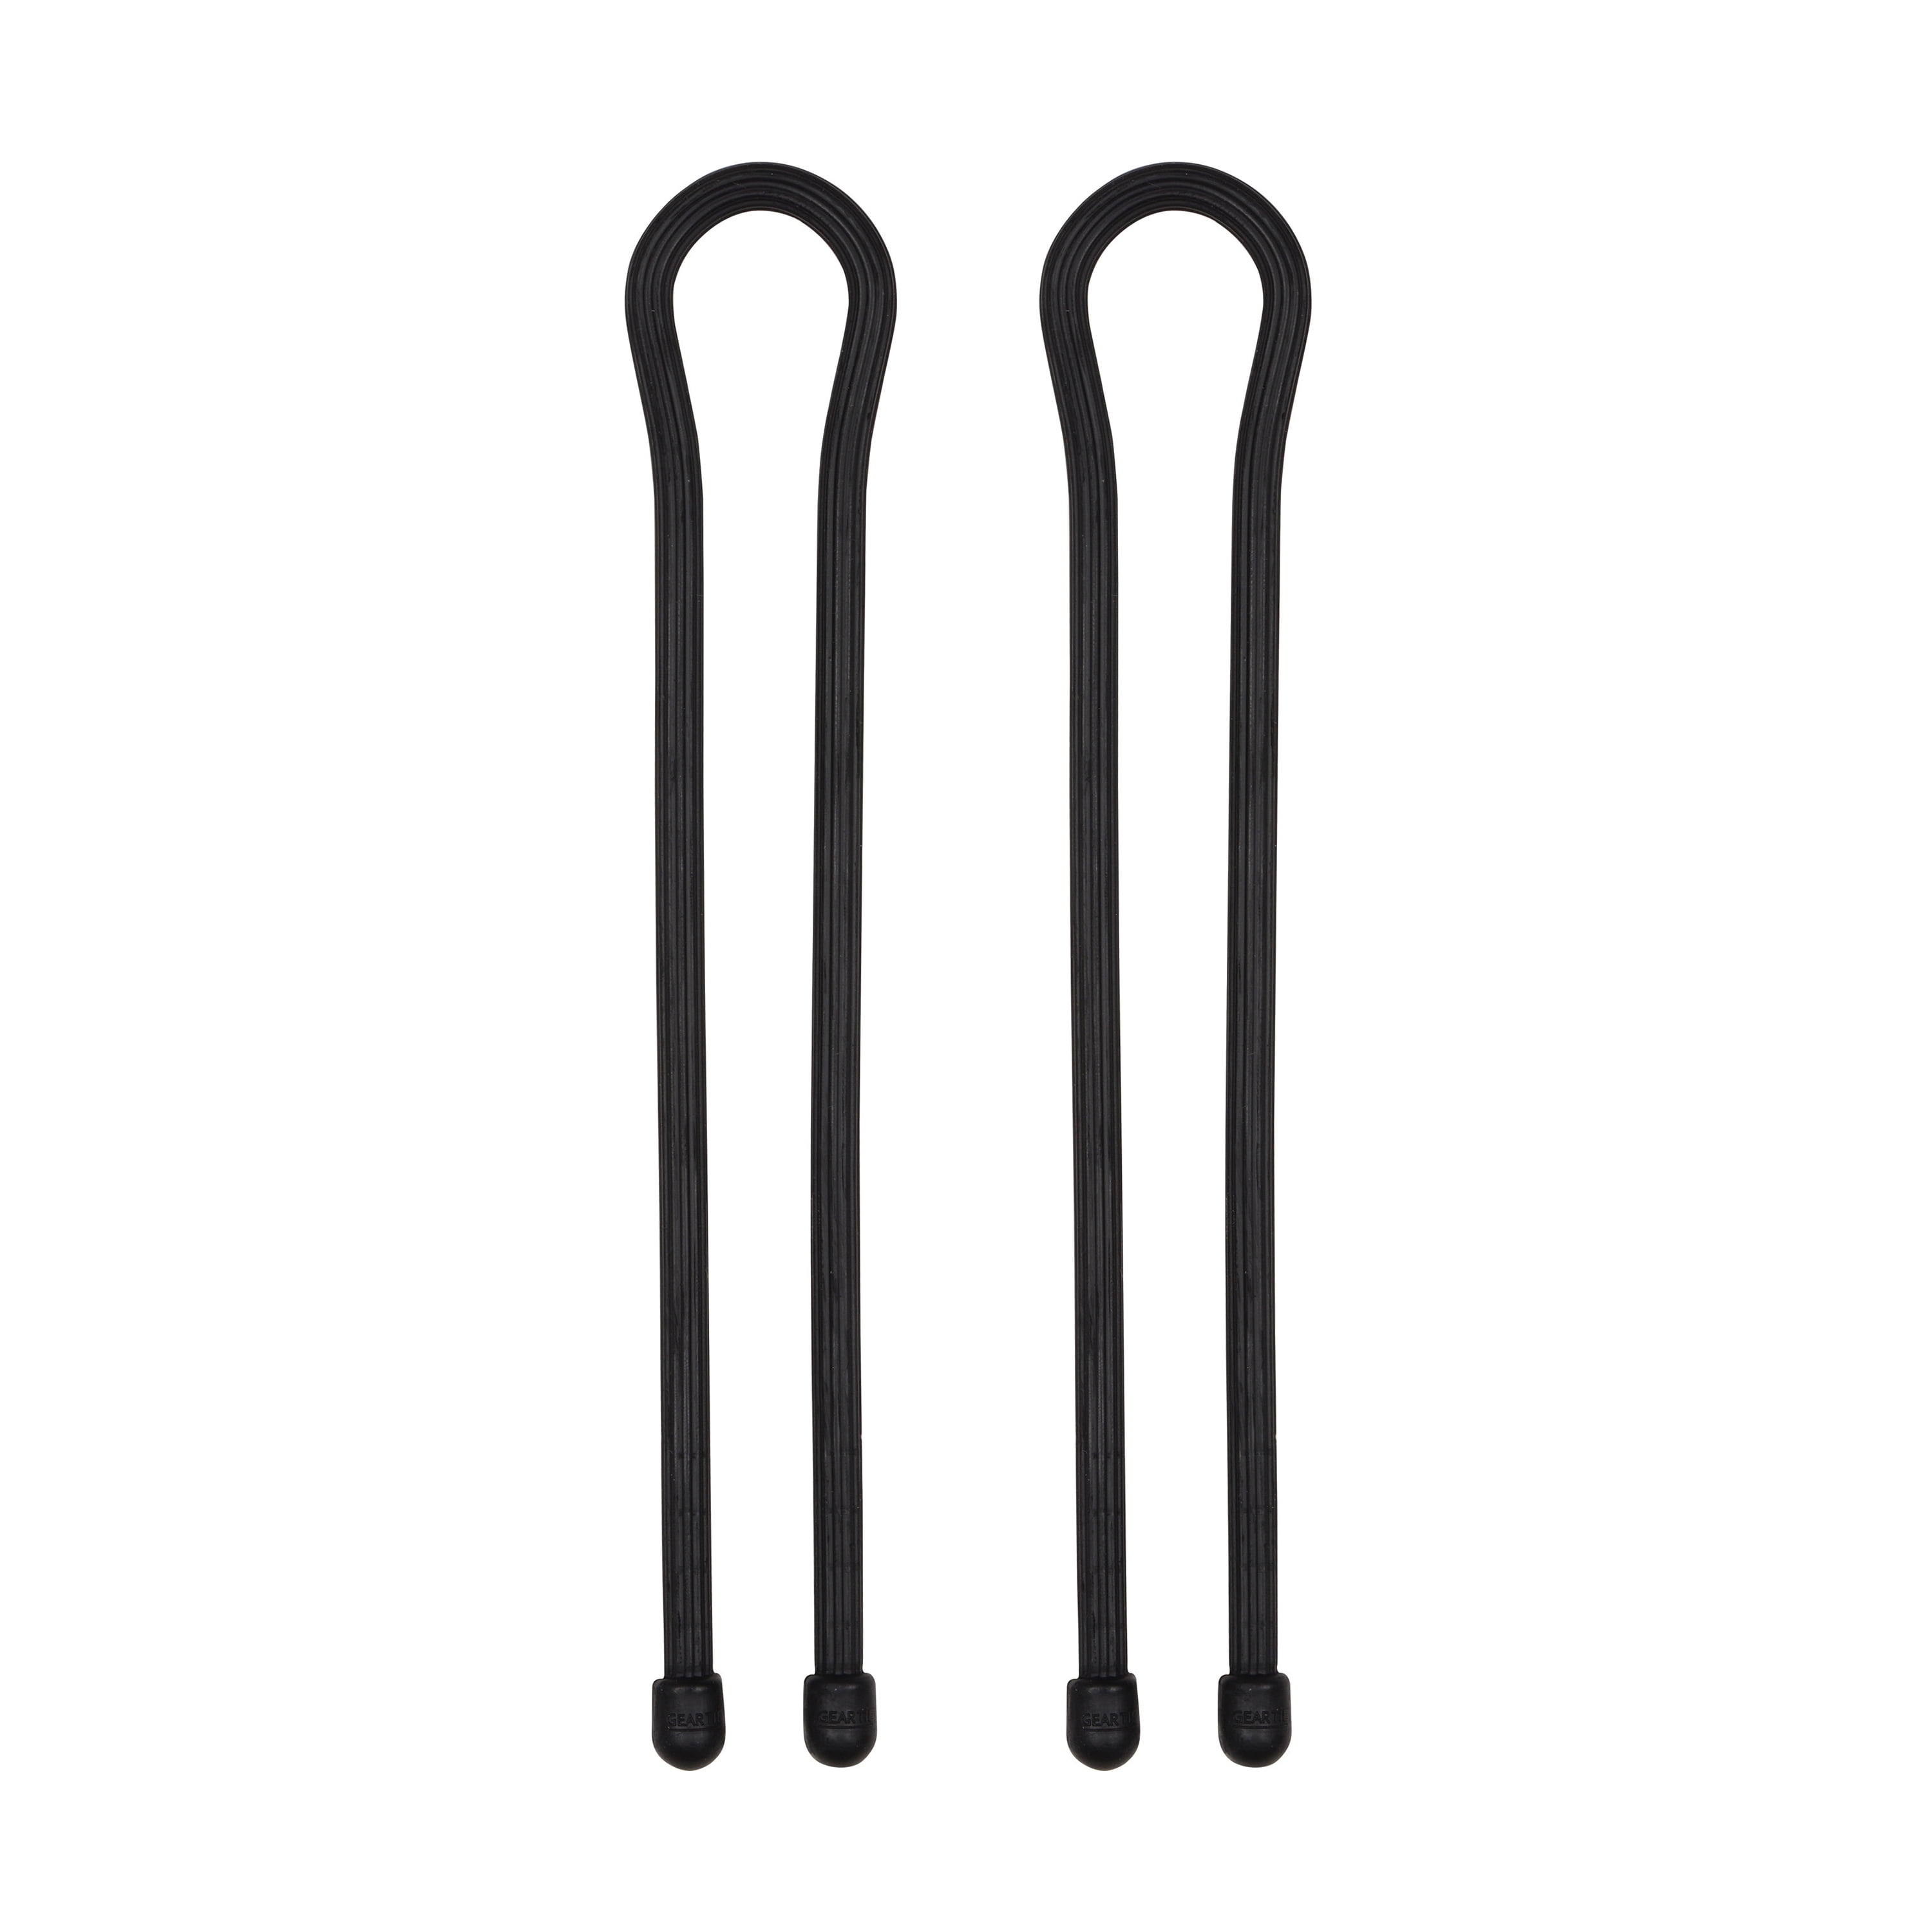 Musician's Gear Cable Ties 5 Pack Black